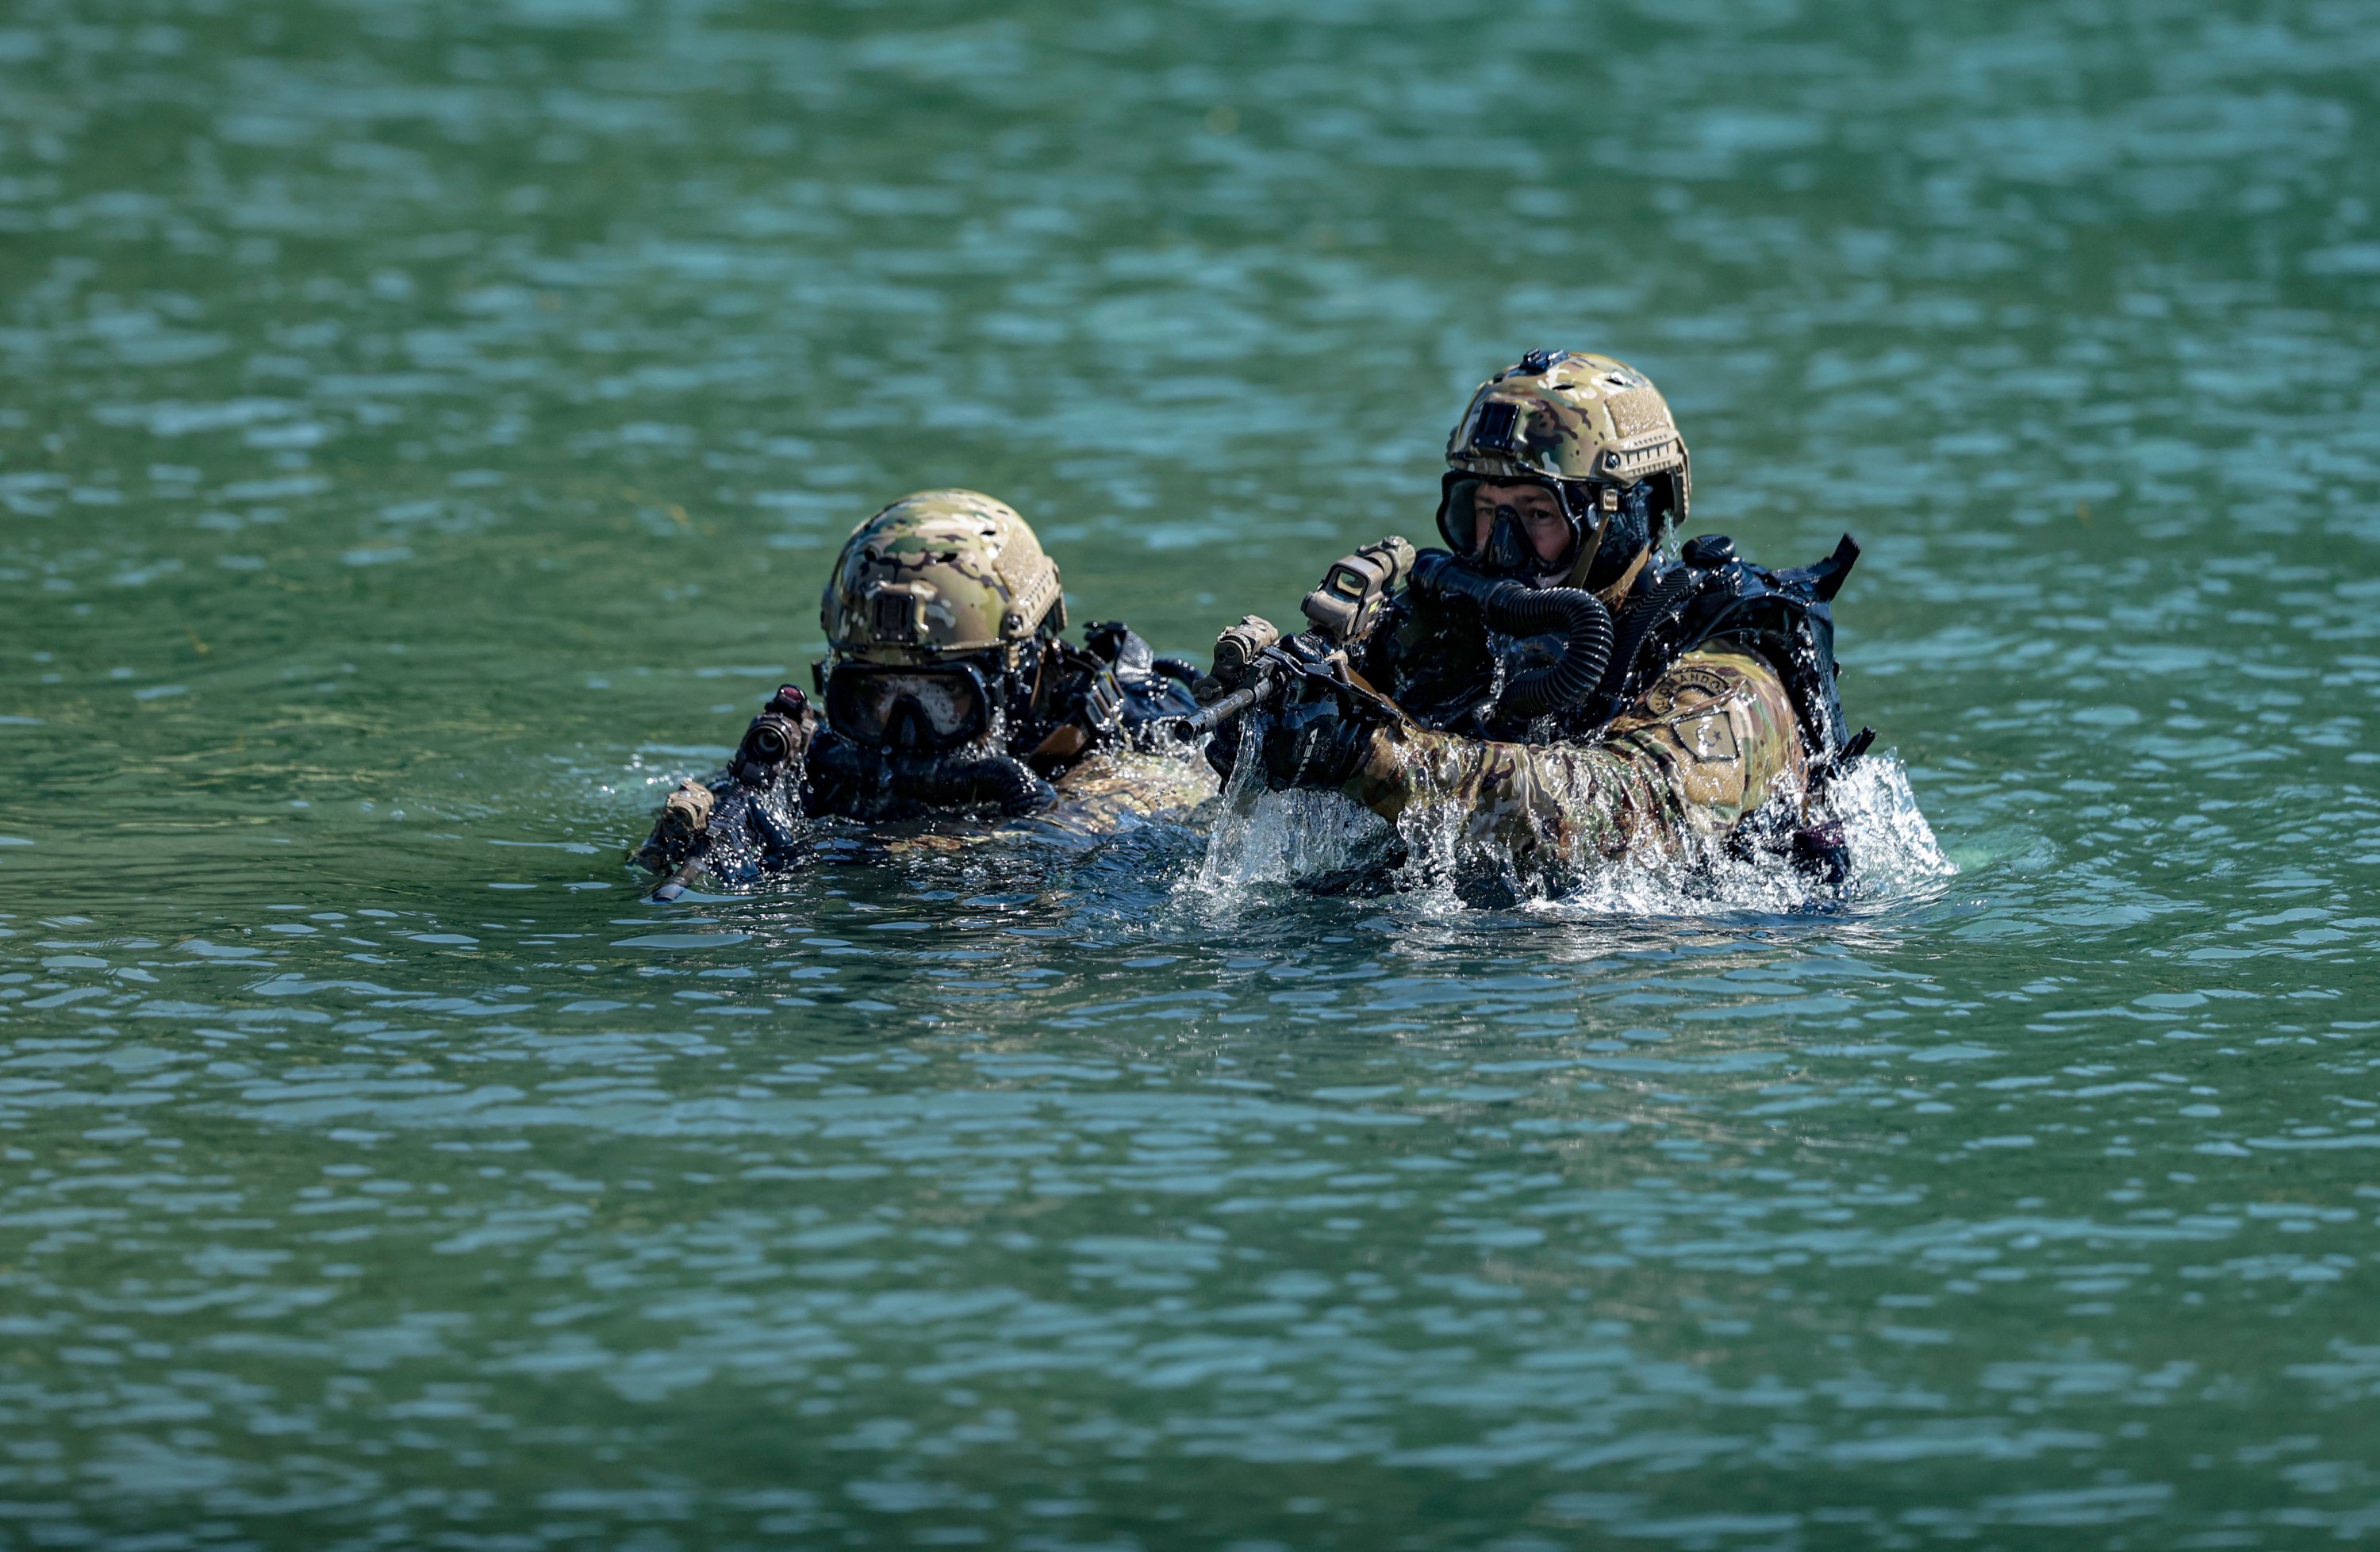 SAT commandos are seen training in the water.